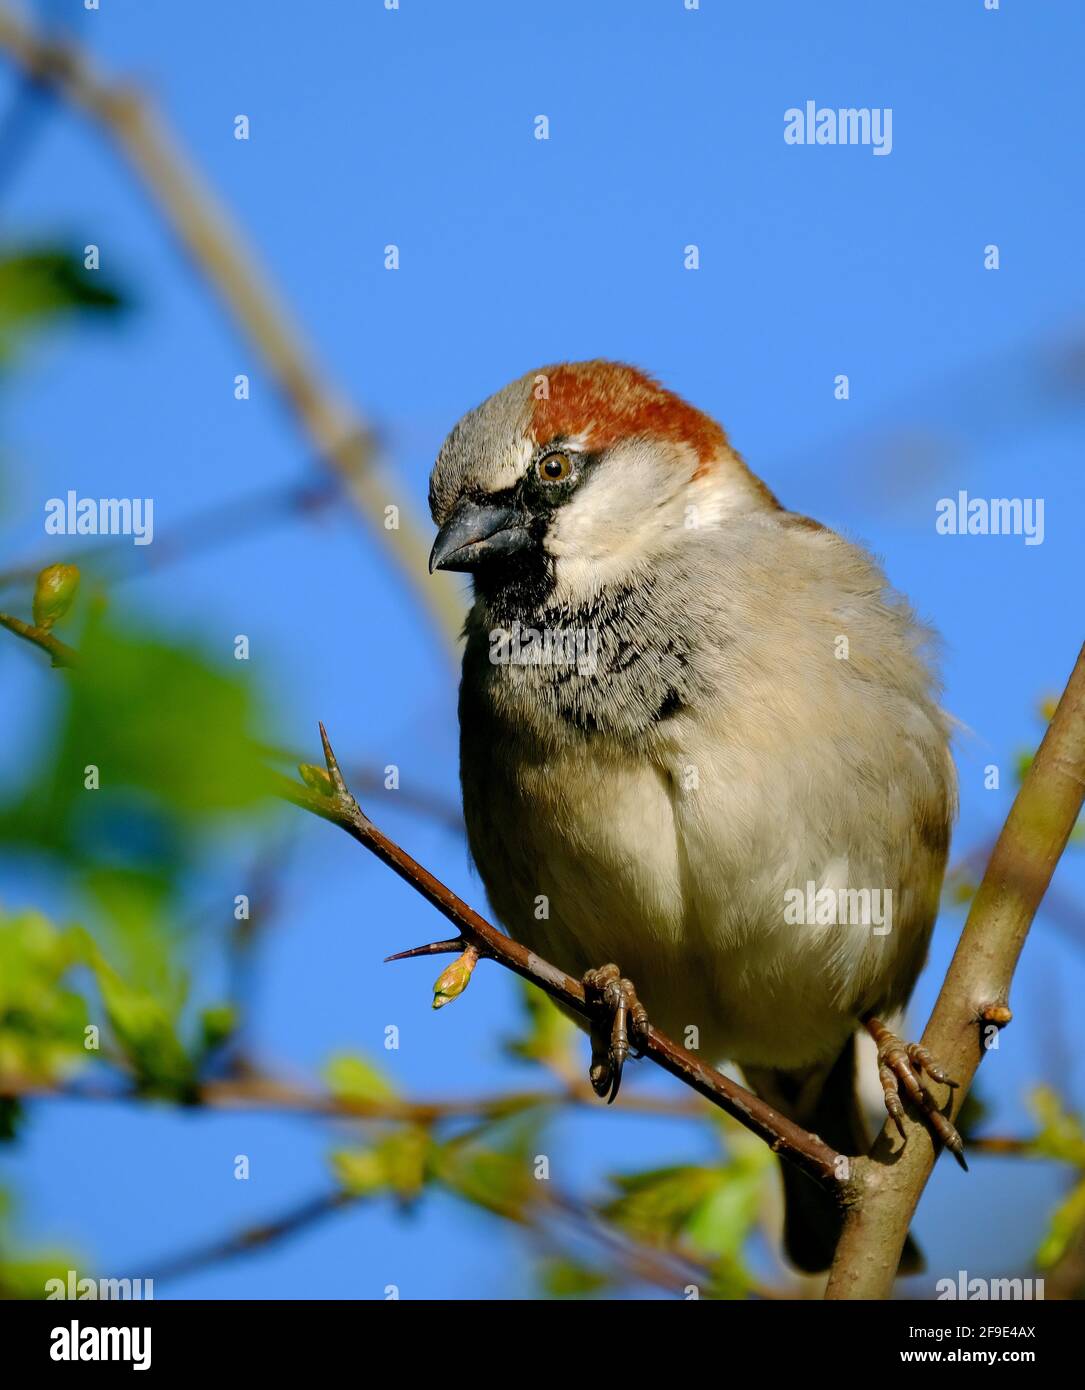 House sparrow looking for food in urban house garden. Stock Photo